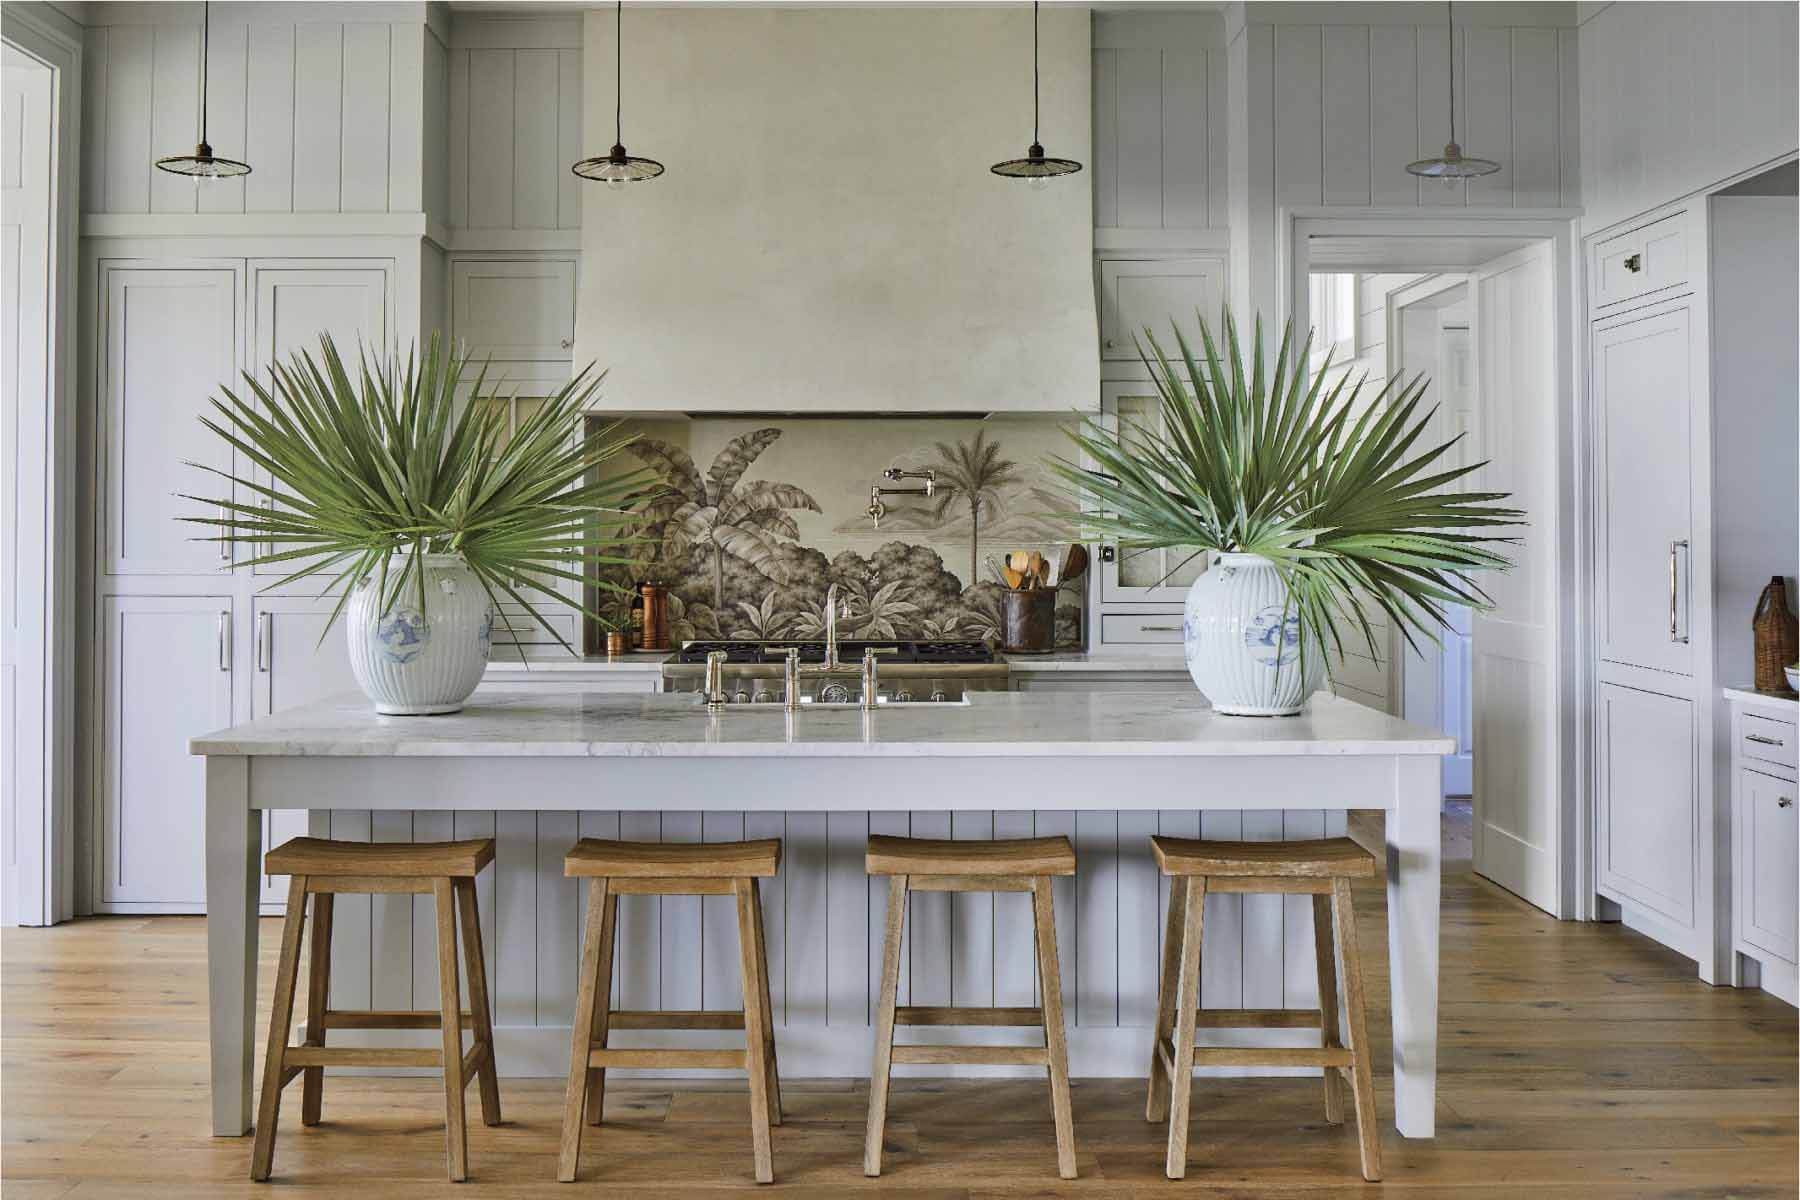 Southern kitchen with a coastal theme designed by Heather Chadduck Interios